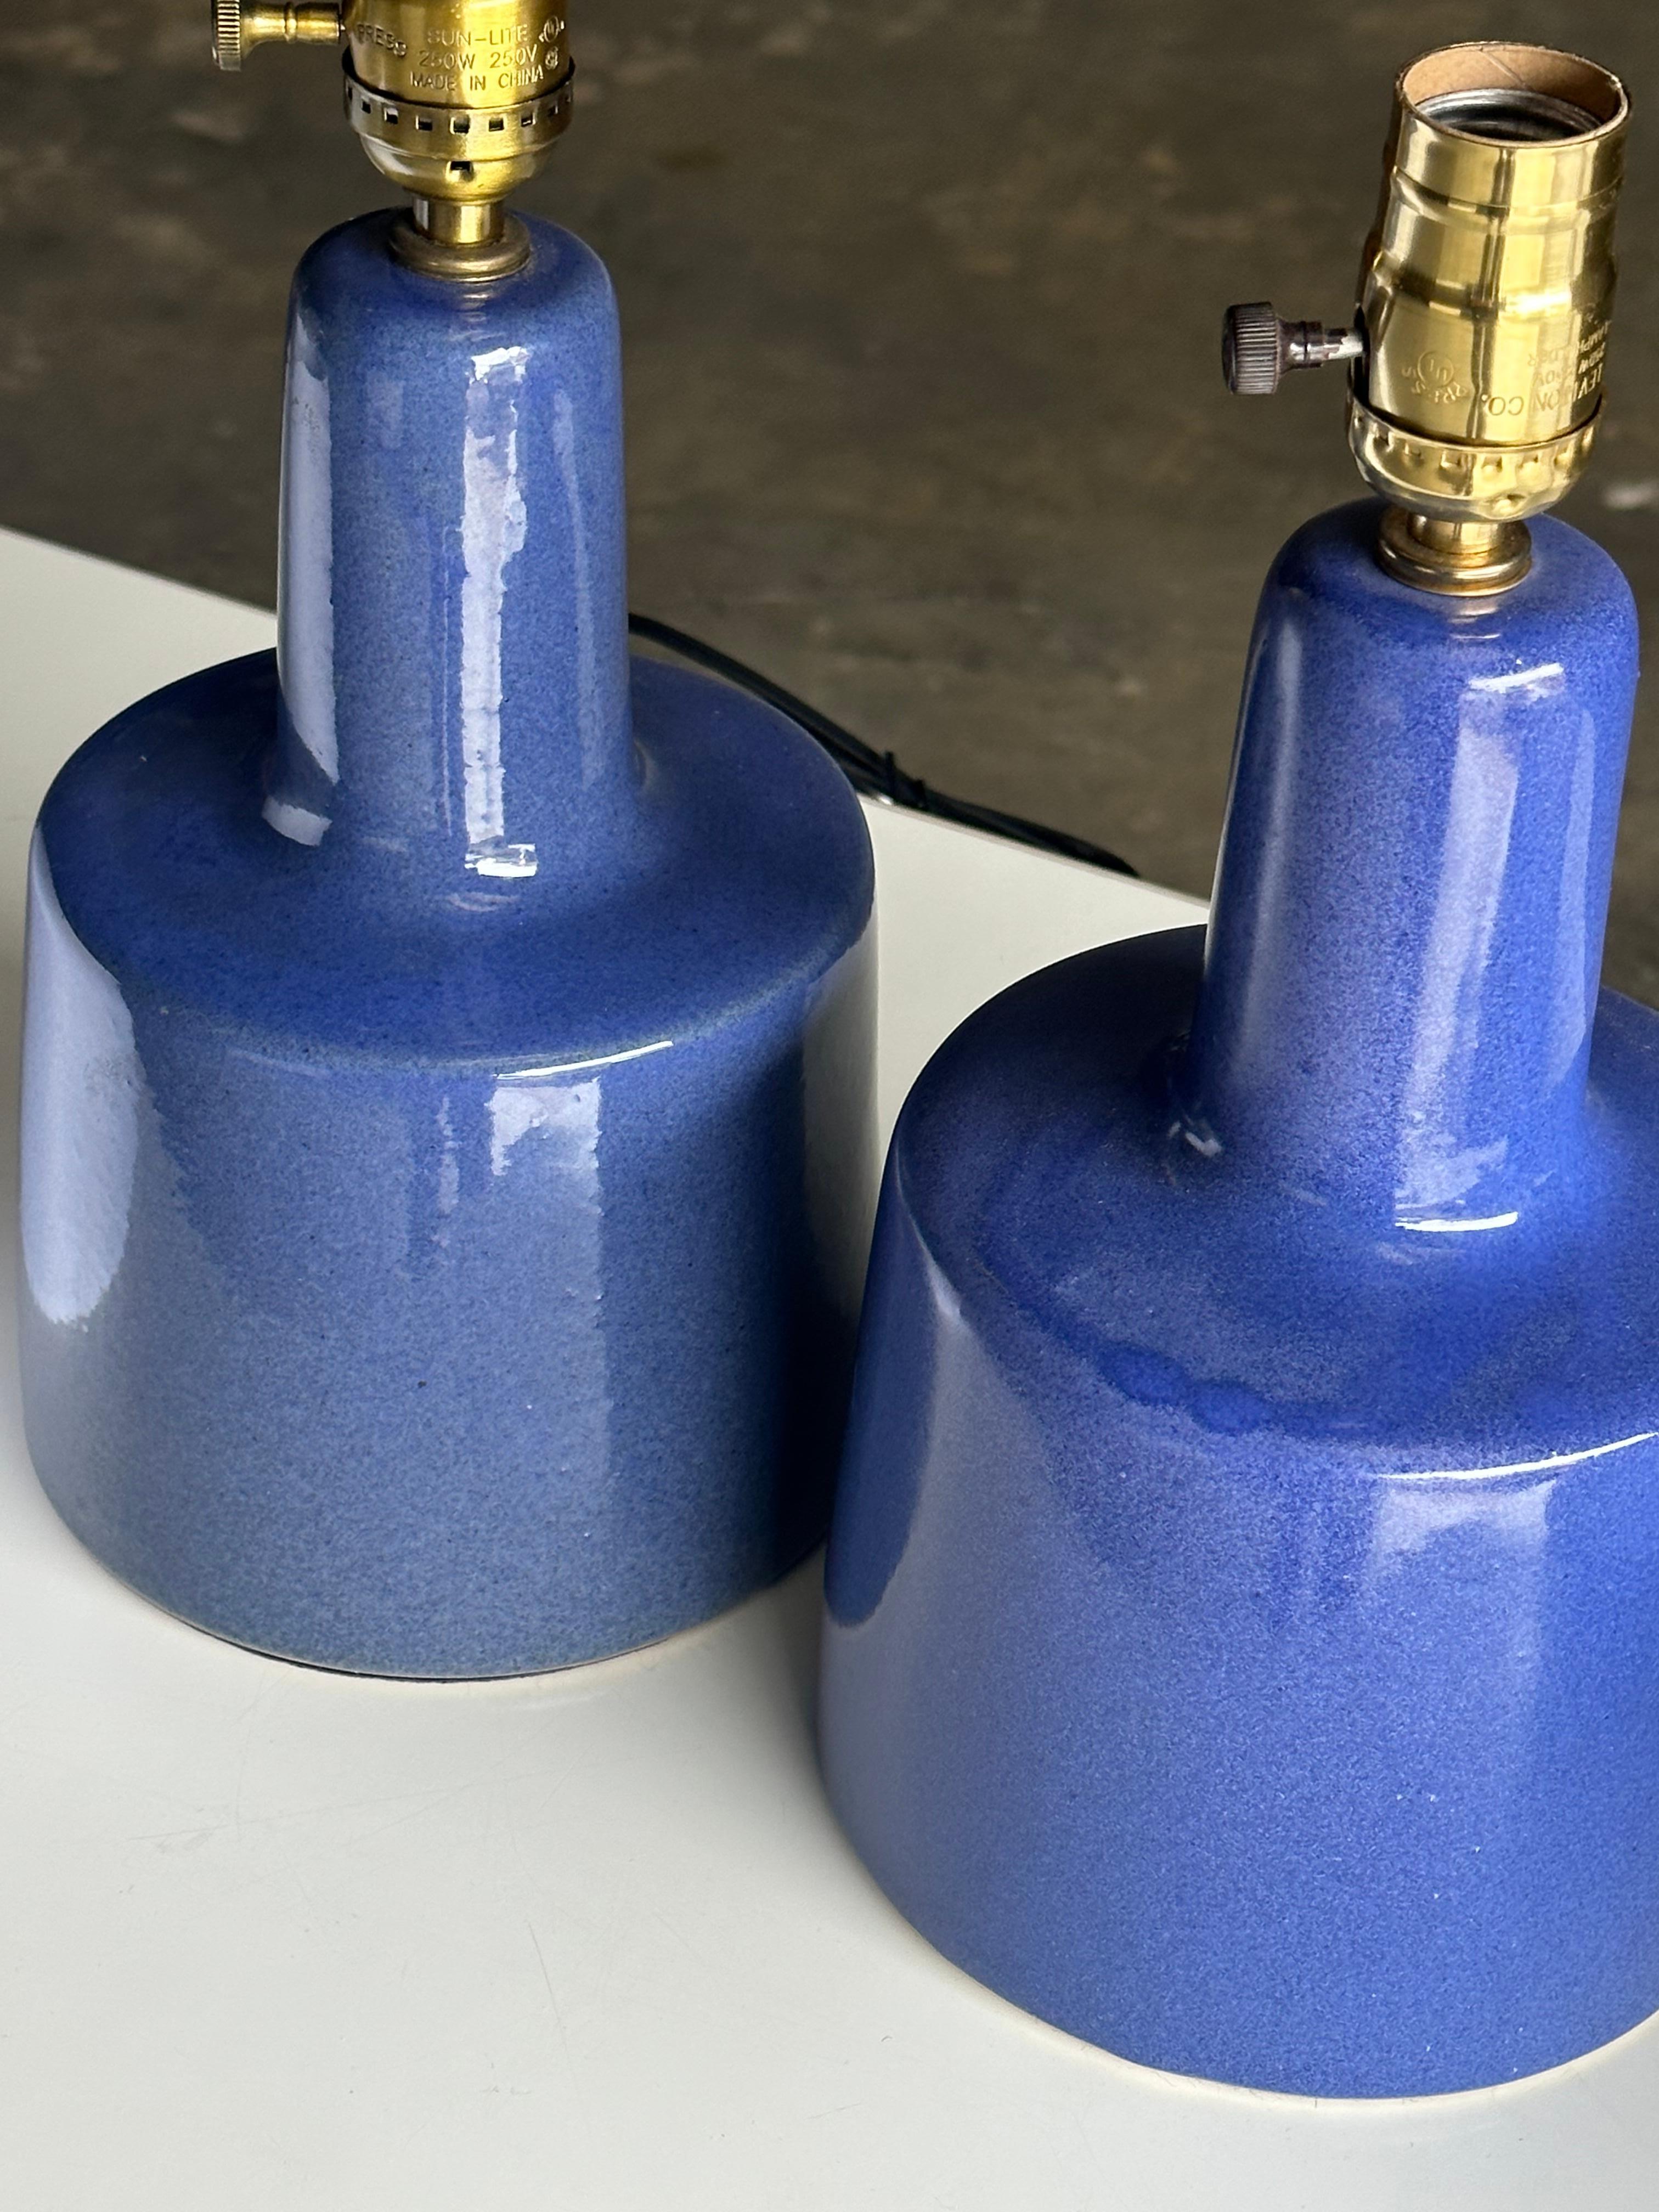 Late 20th Century Martz Lamps by Jane and Gordon Martz for Marshall Studios, Blue, Ceramic